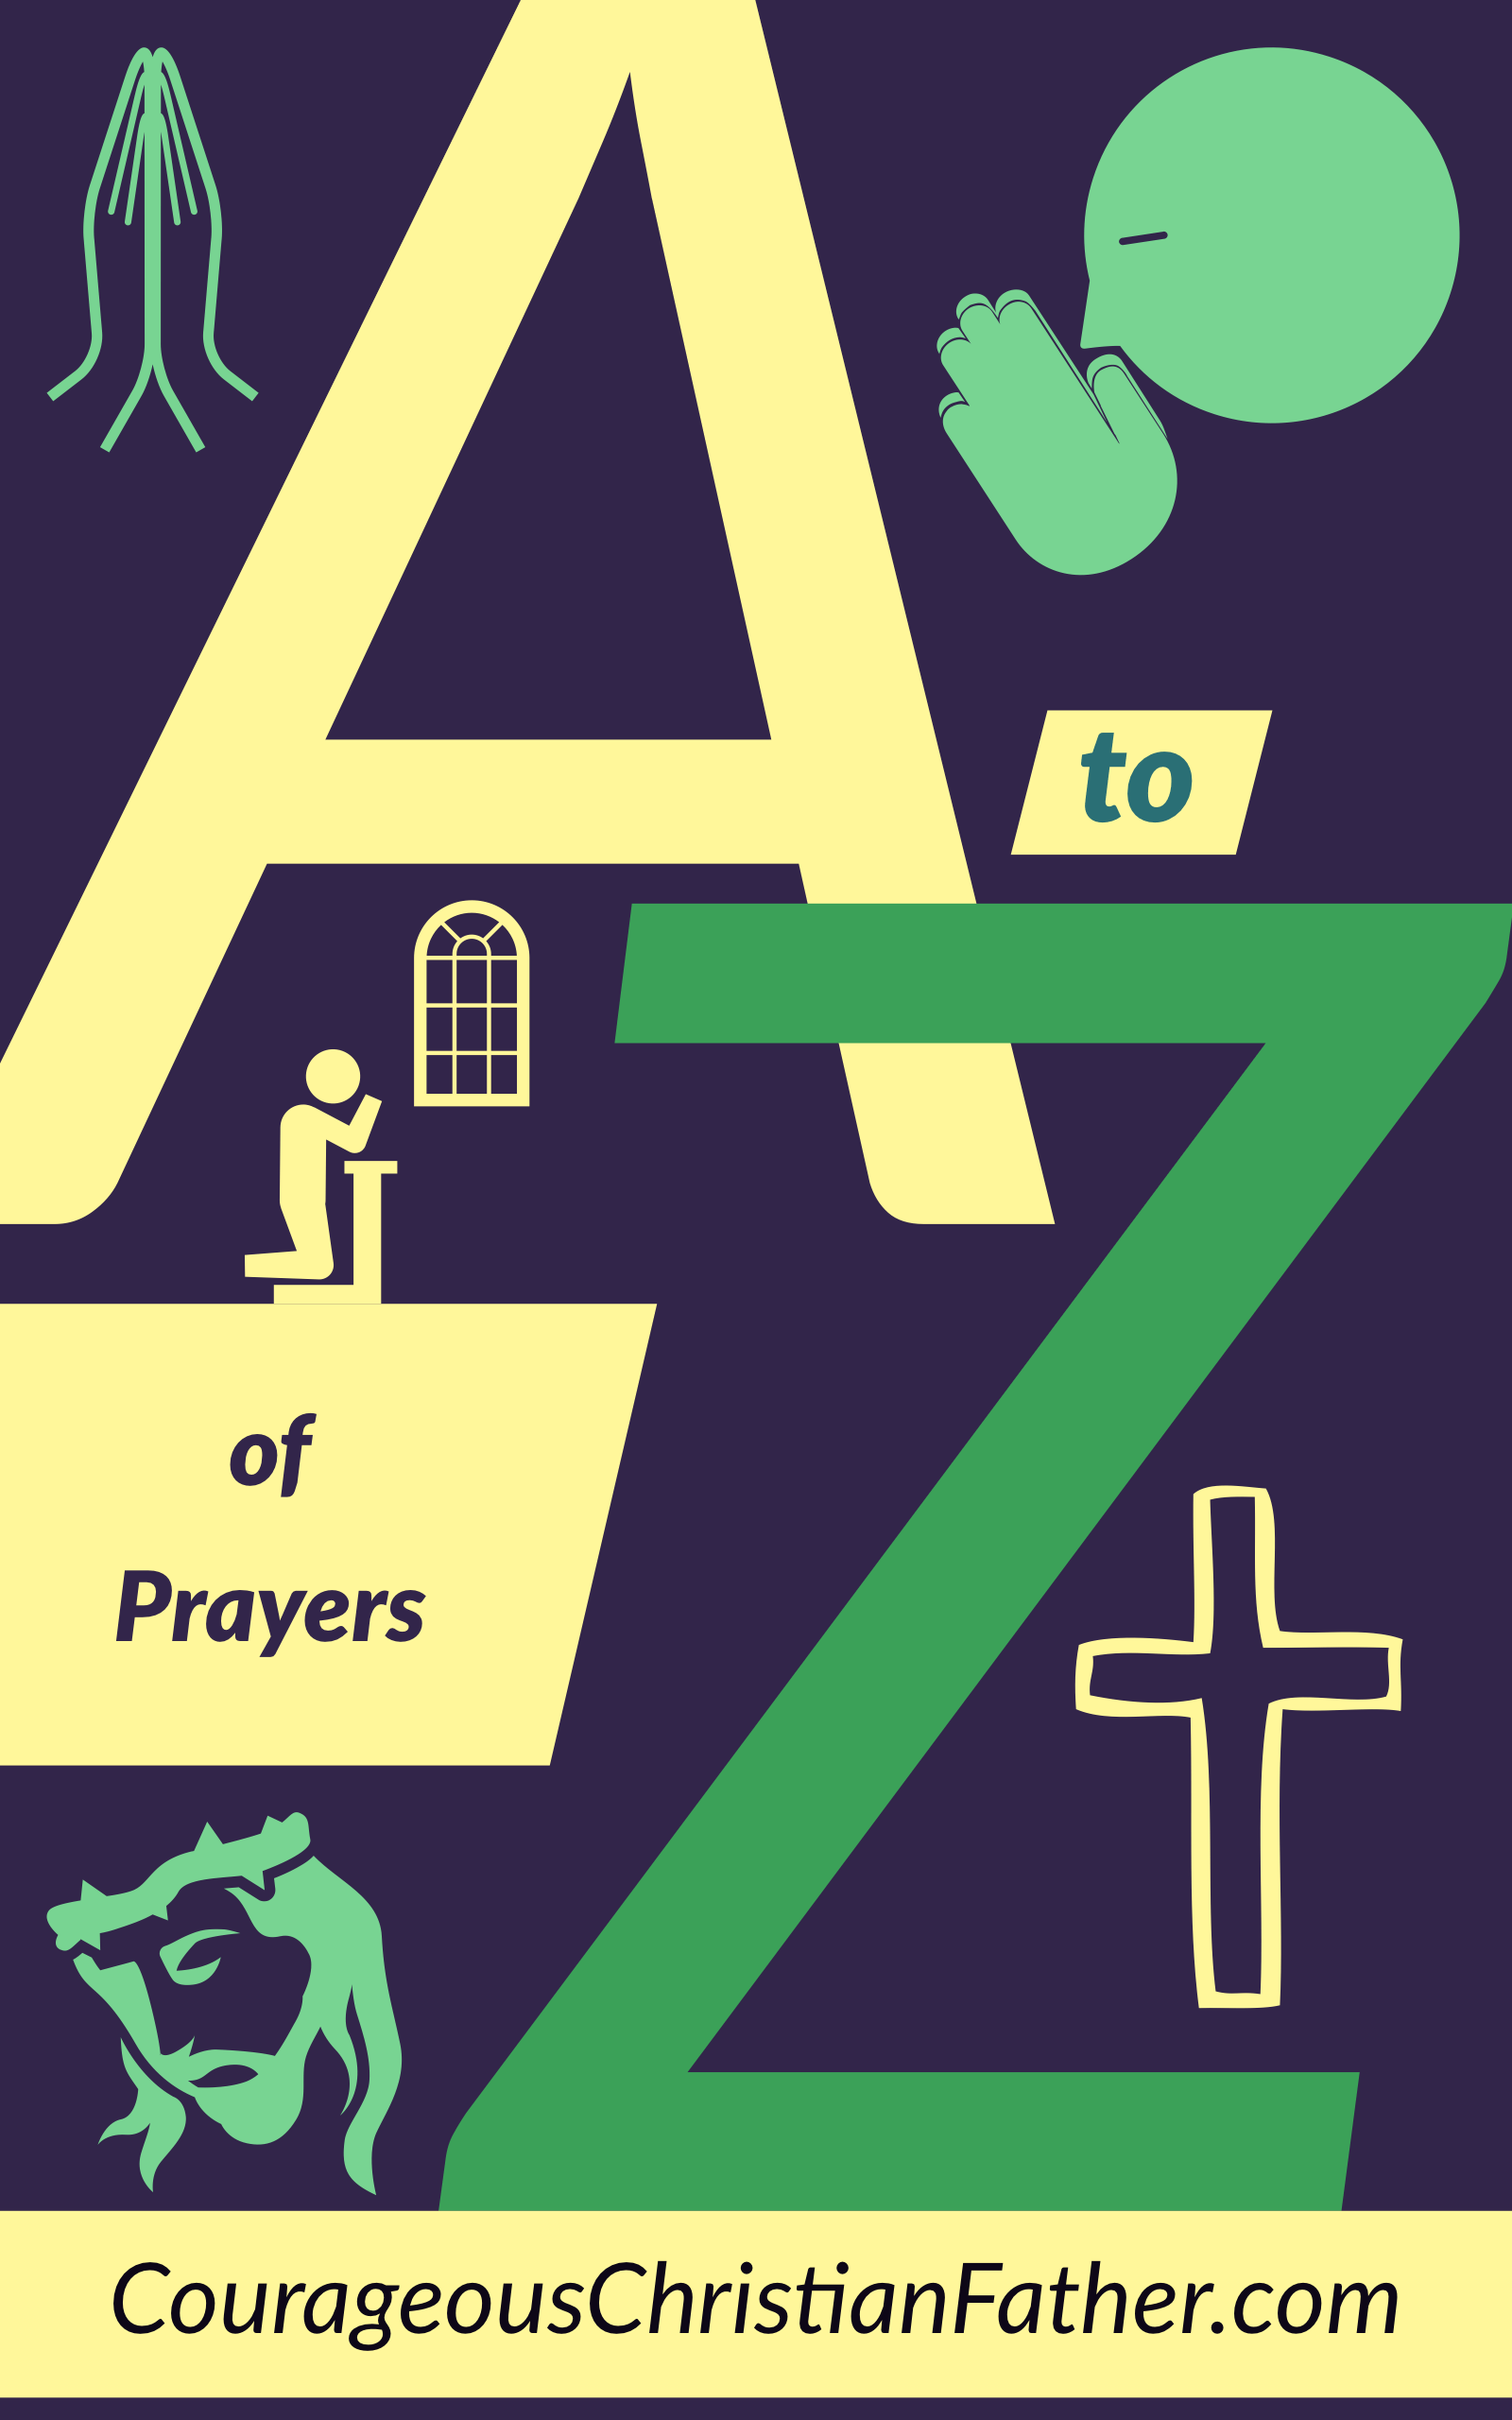 The A-Z of Prayers - This is an alphabetical list of anything to do with prayers and praying starting with the letter A and ending in Z. #Prayers #Praying